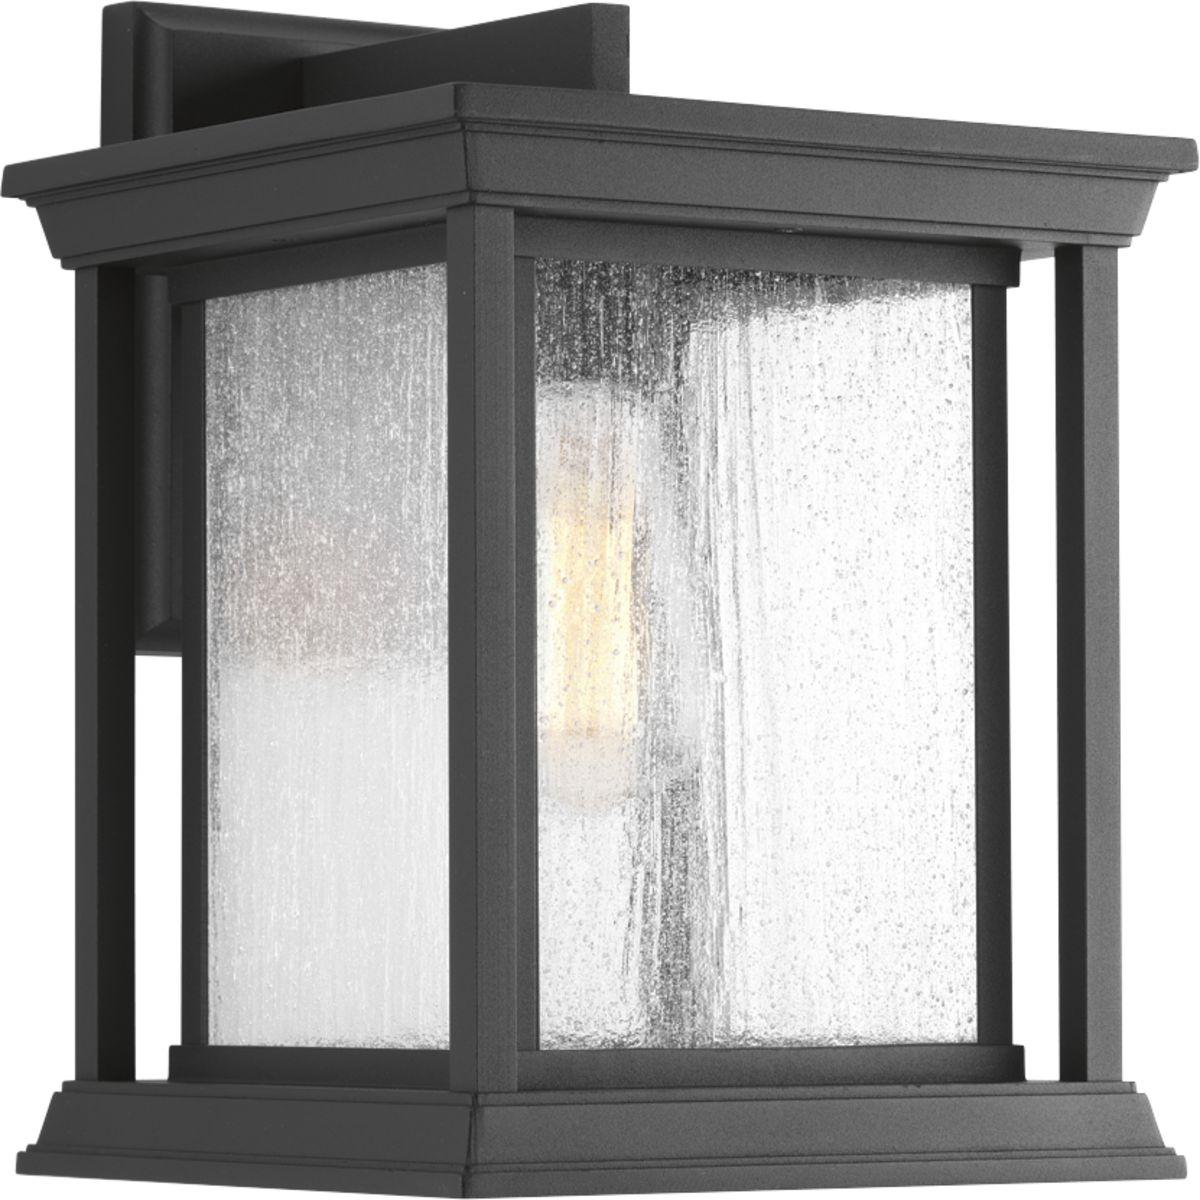 Hubbell P5611-31 One-Light large wall lantern with a Craftsman-inspired silhouette, Endicott offers visual interest to your home's exterior. The elongated frame is finished with clear seeded glass.  ; Features a Craftsman-inspired silhouette ; An outdoor lantern with an e